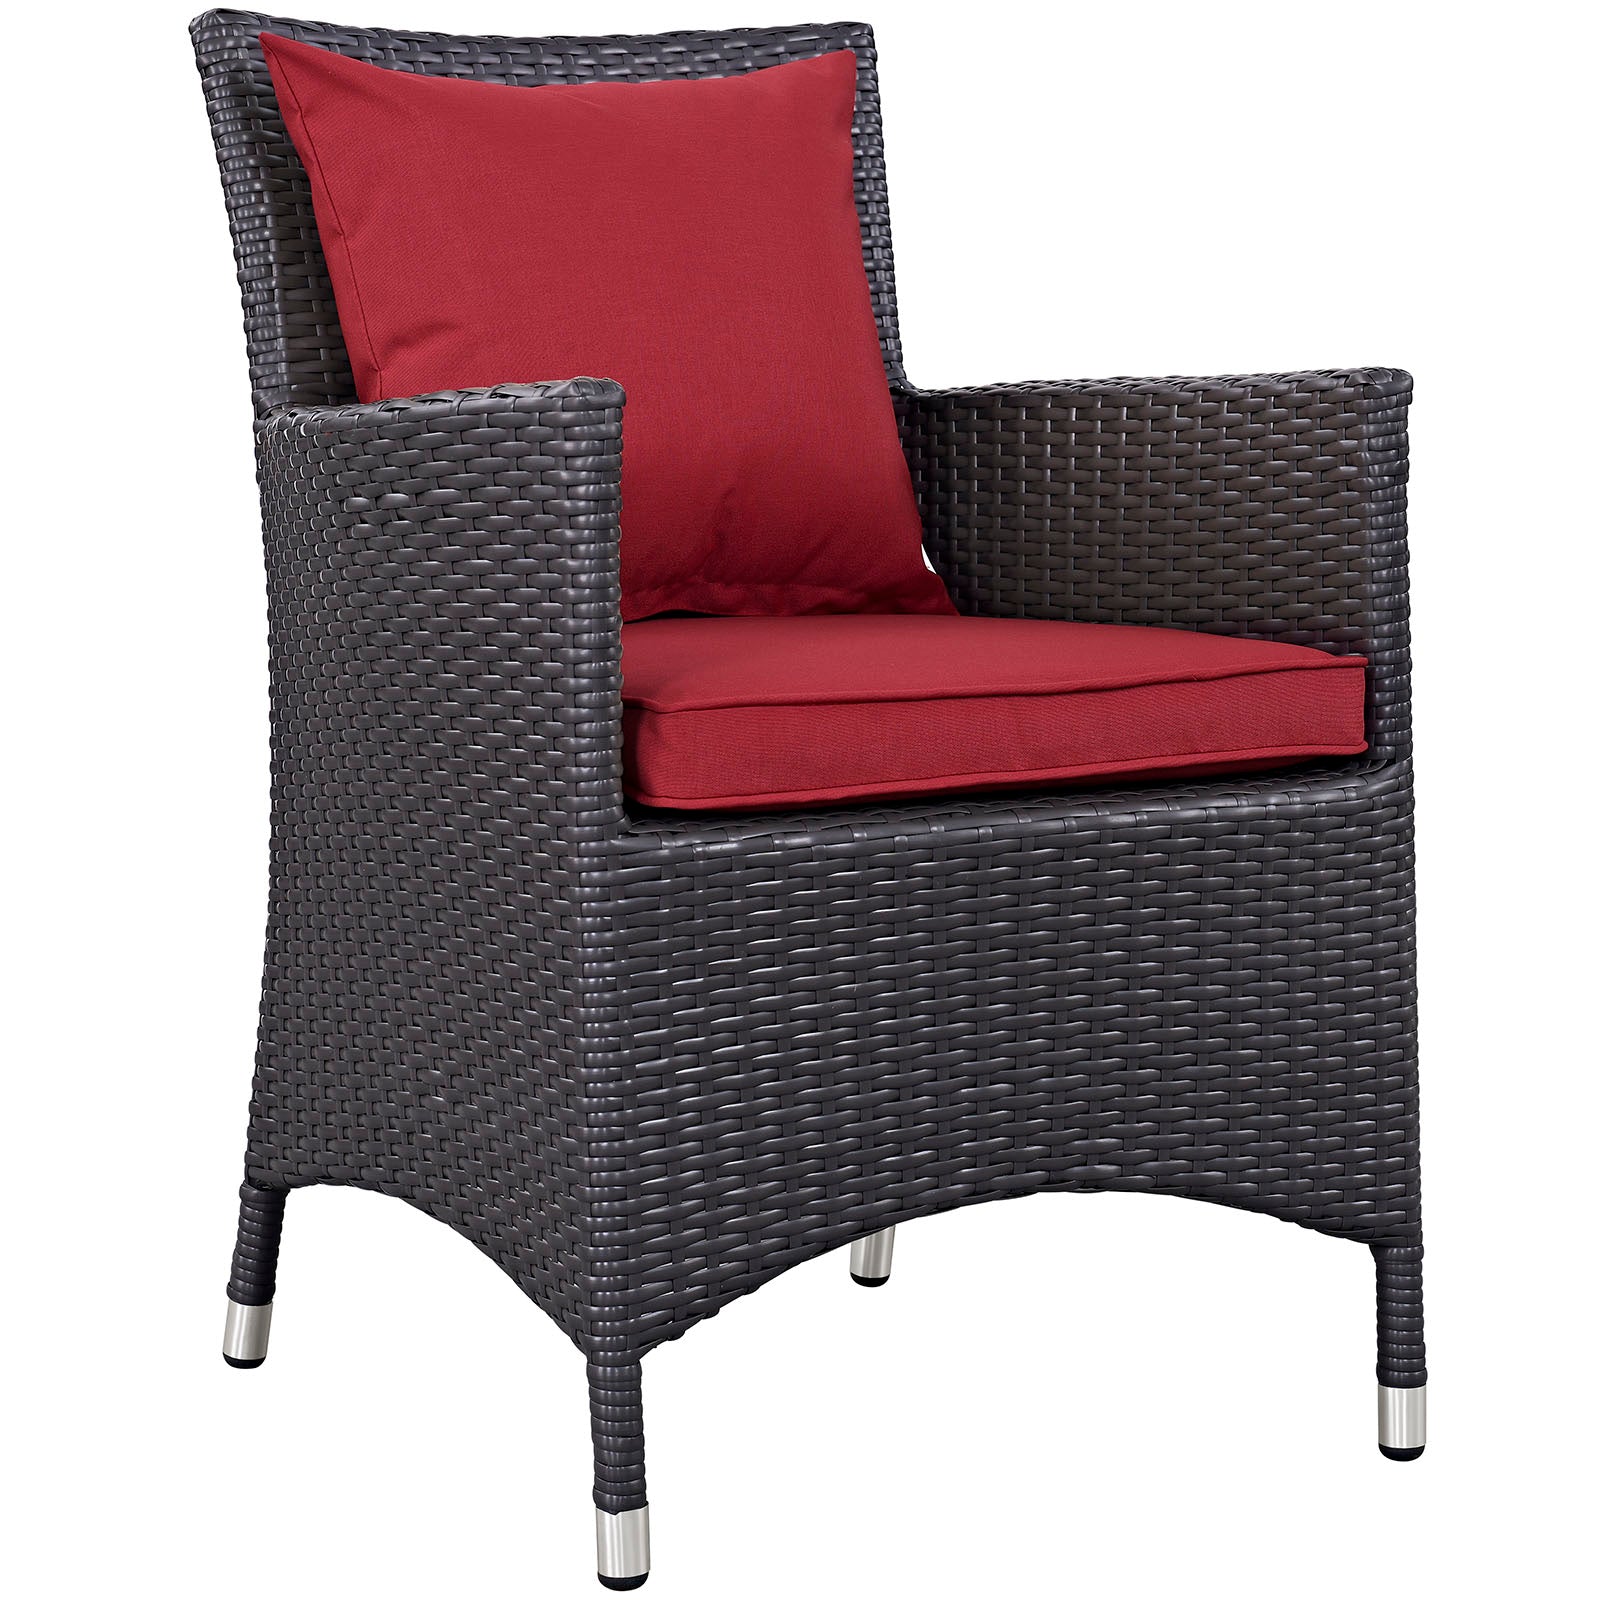 Modway Outdoor Dining Sets - Convene 2 Piece Outdoor Patio Dining Set Espresso Red